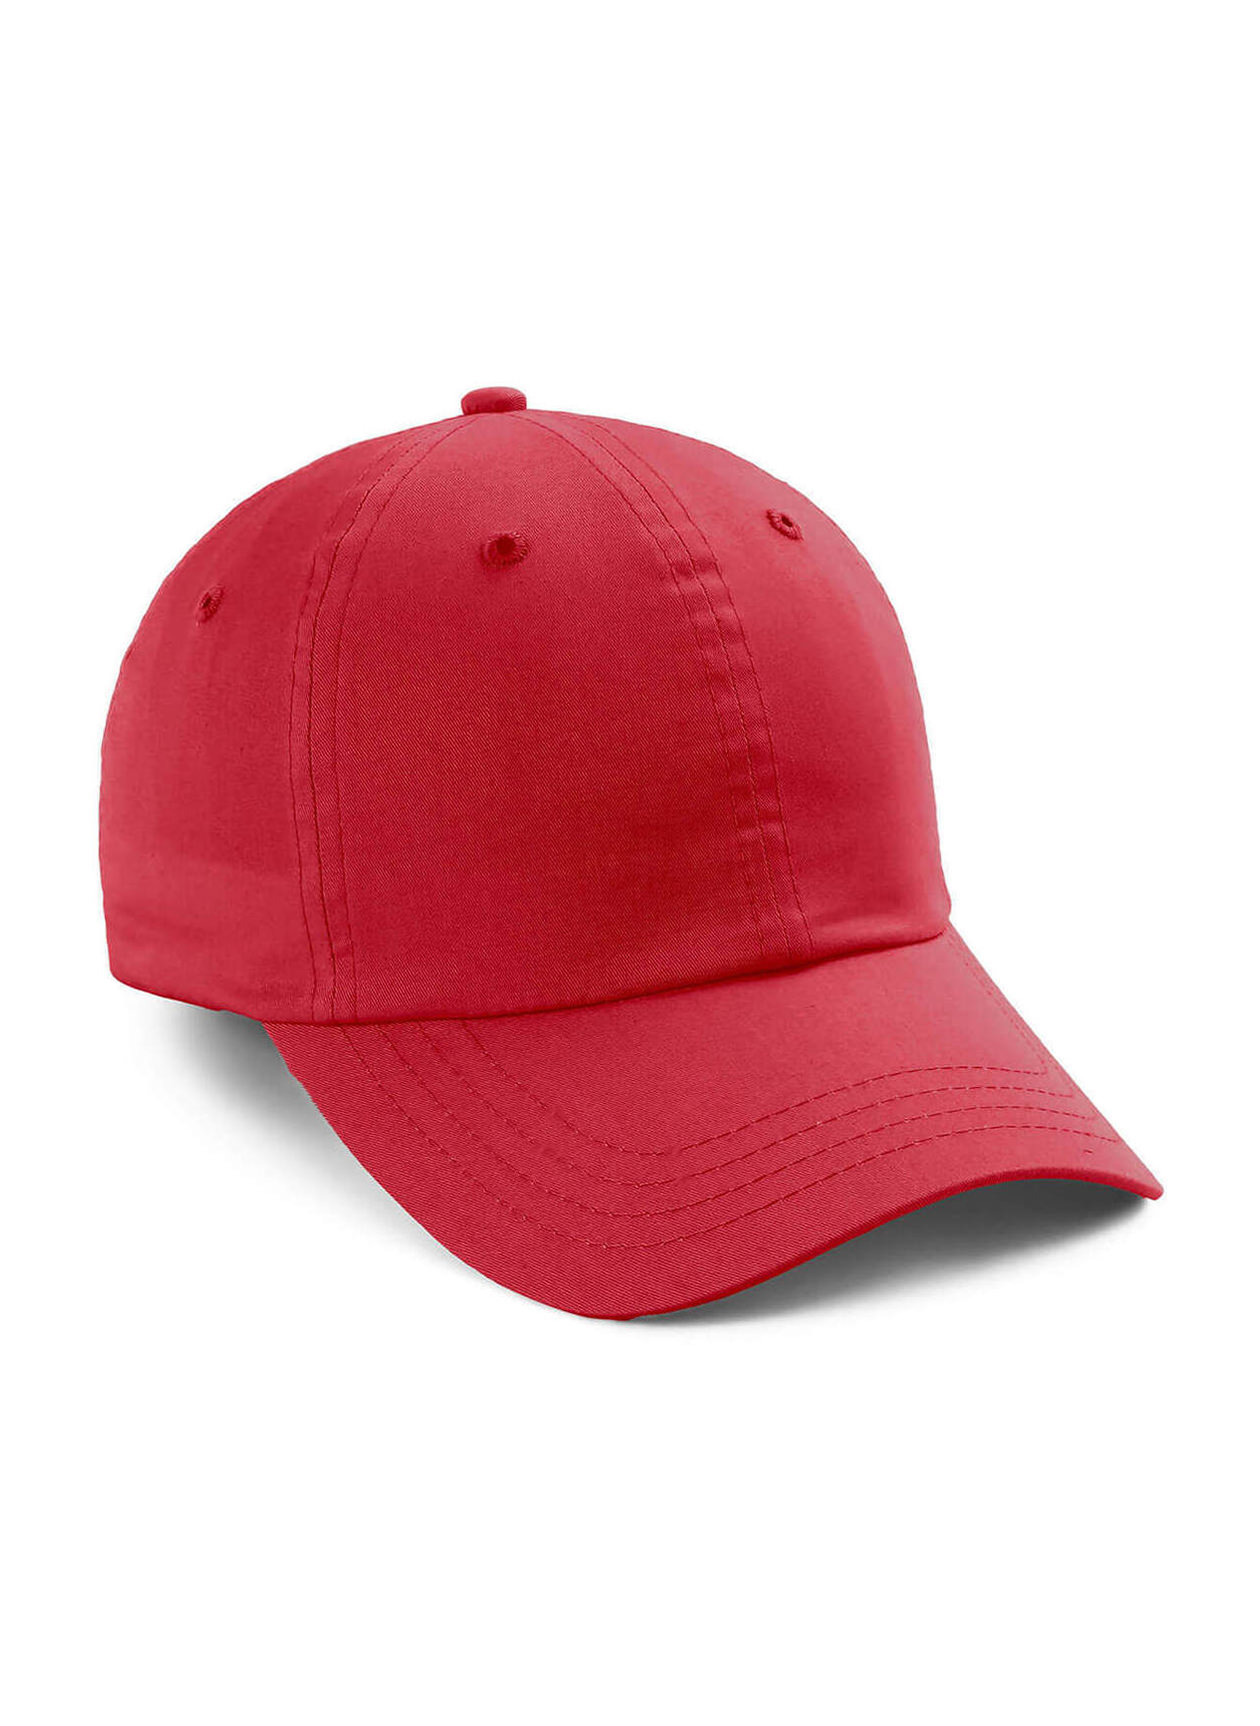 Imperial Red The Zero Lightweight Cotton Hat